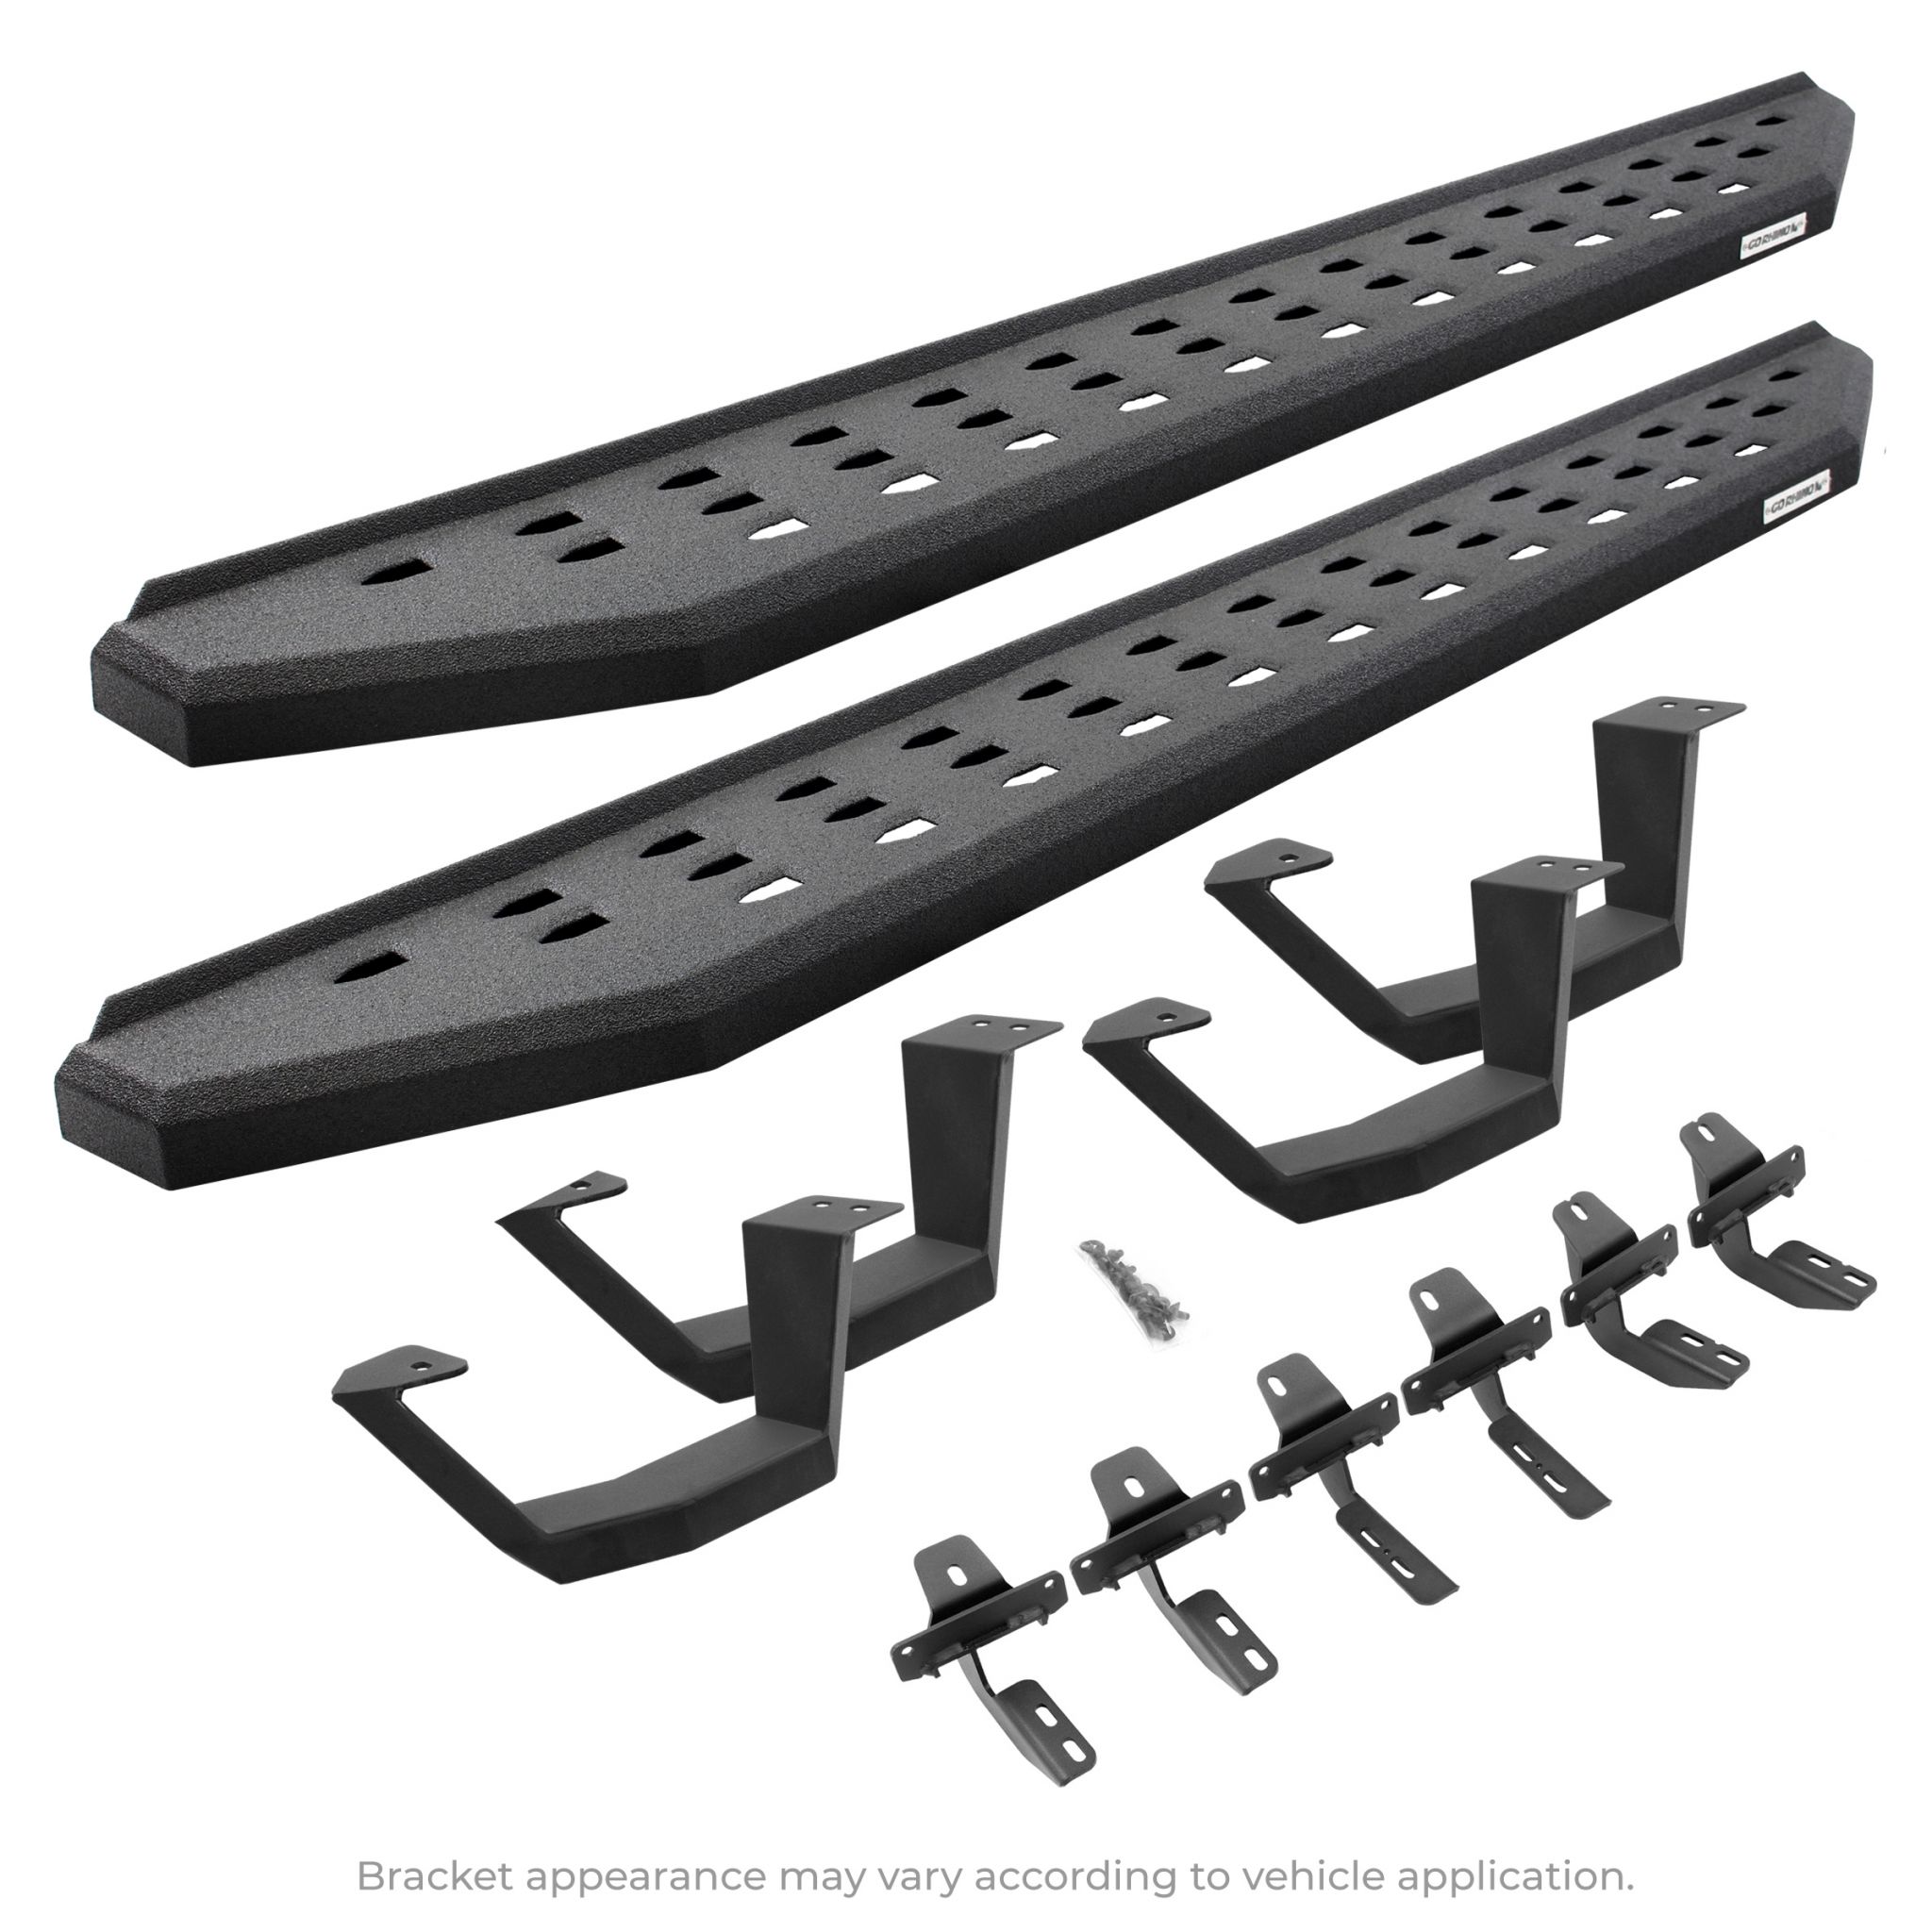 Go Rhino - 6940488020T - RB20 Running Boards With Mounting Brackets & 2 Pairs of Drop Steps Kit - Protective Bedliner Coating